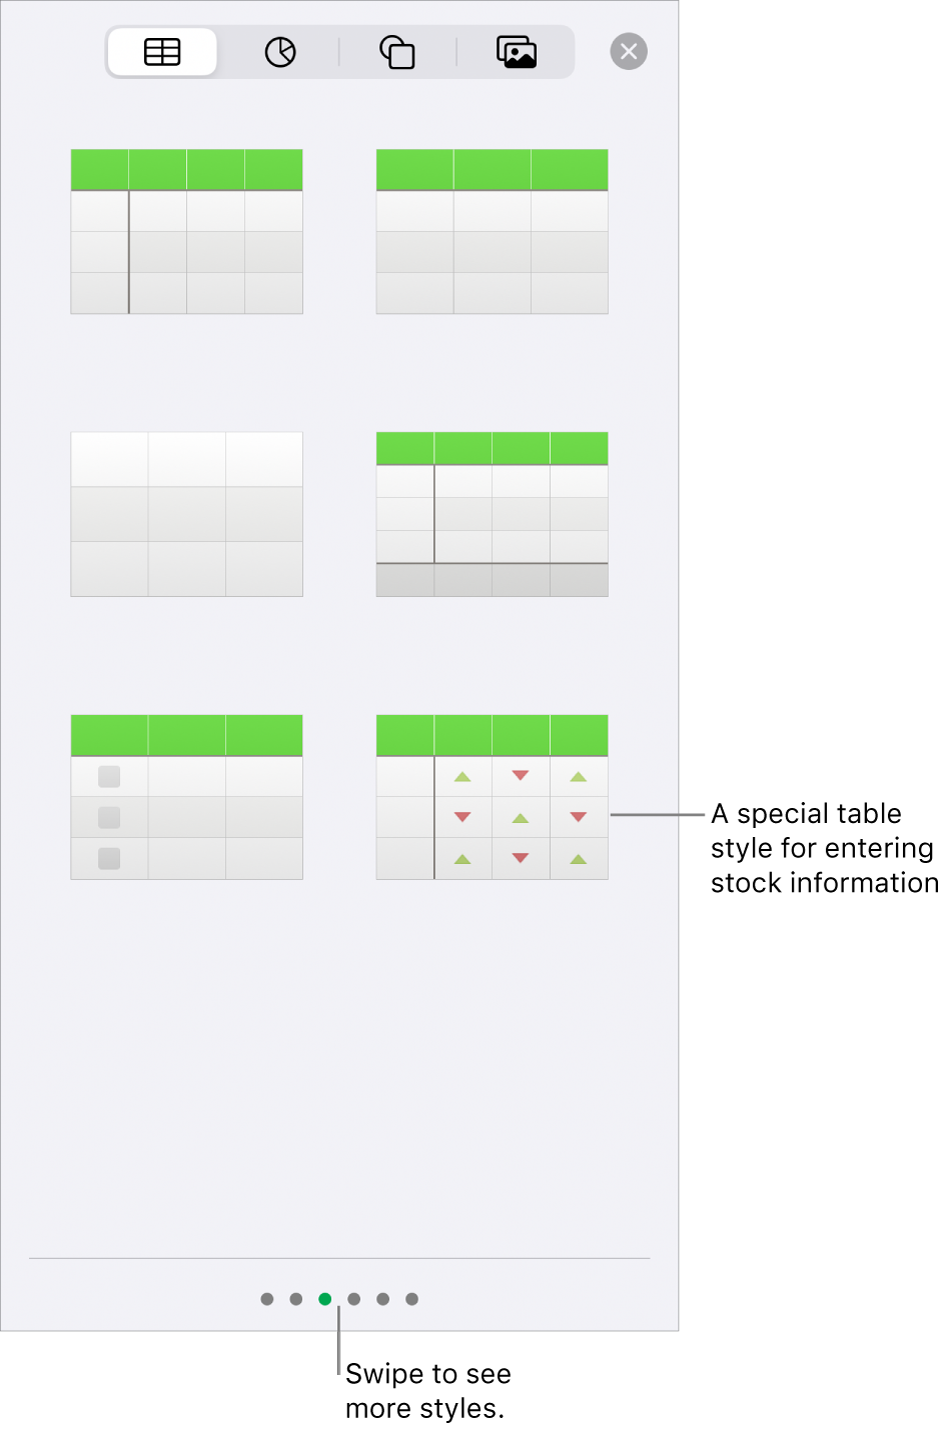 Thumbnails of the available table styles, with a special style for entering stock information in the bottom-right corner. Six dots at the bottom indicate you can swipe to see more styles.